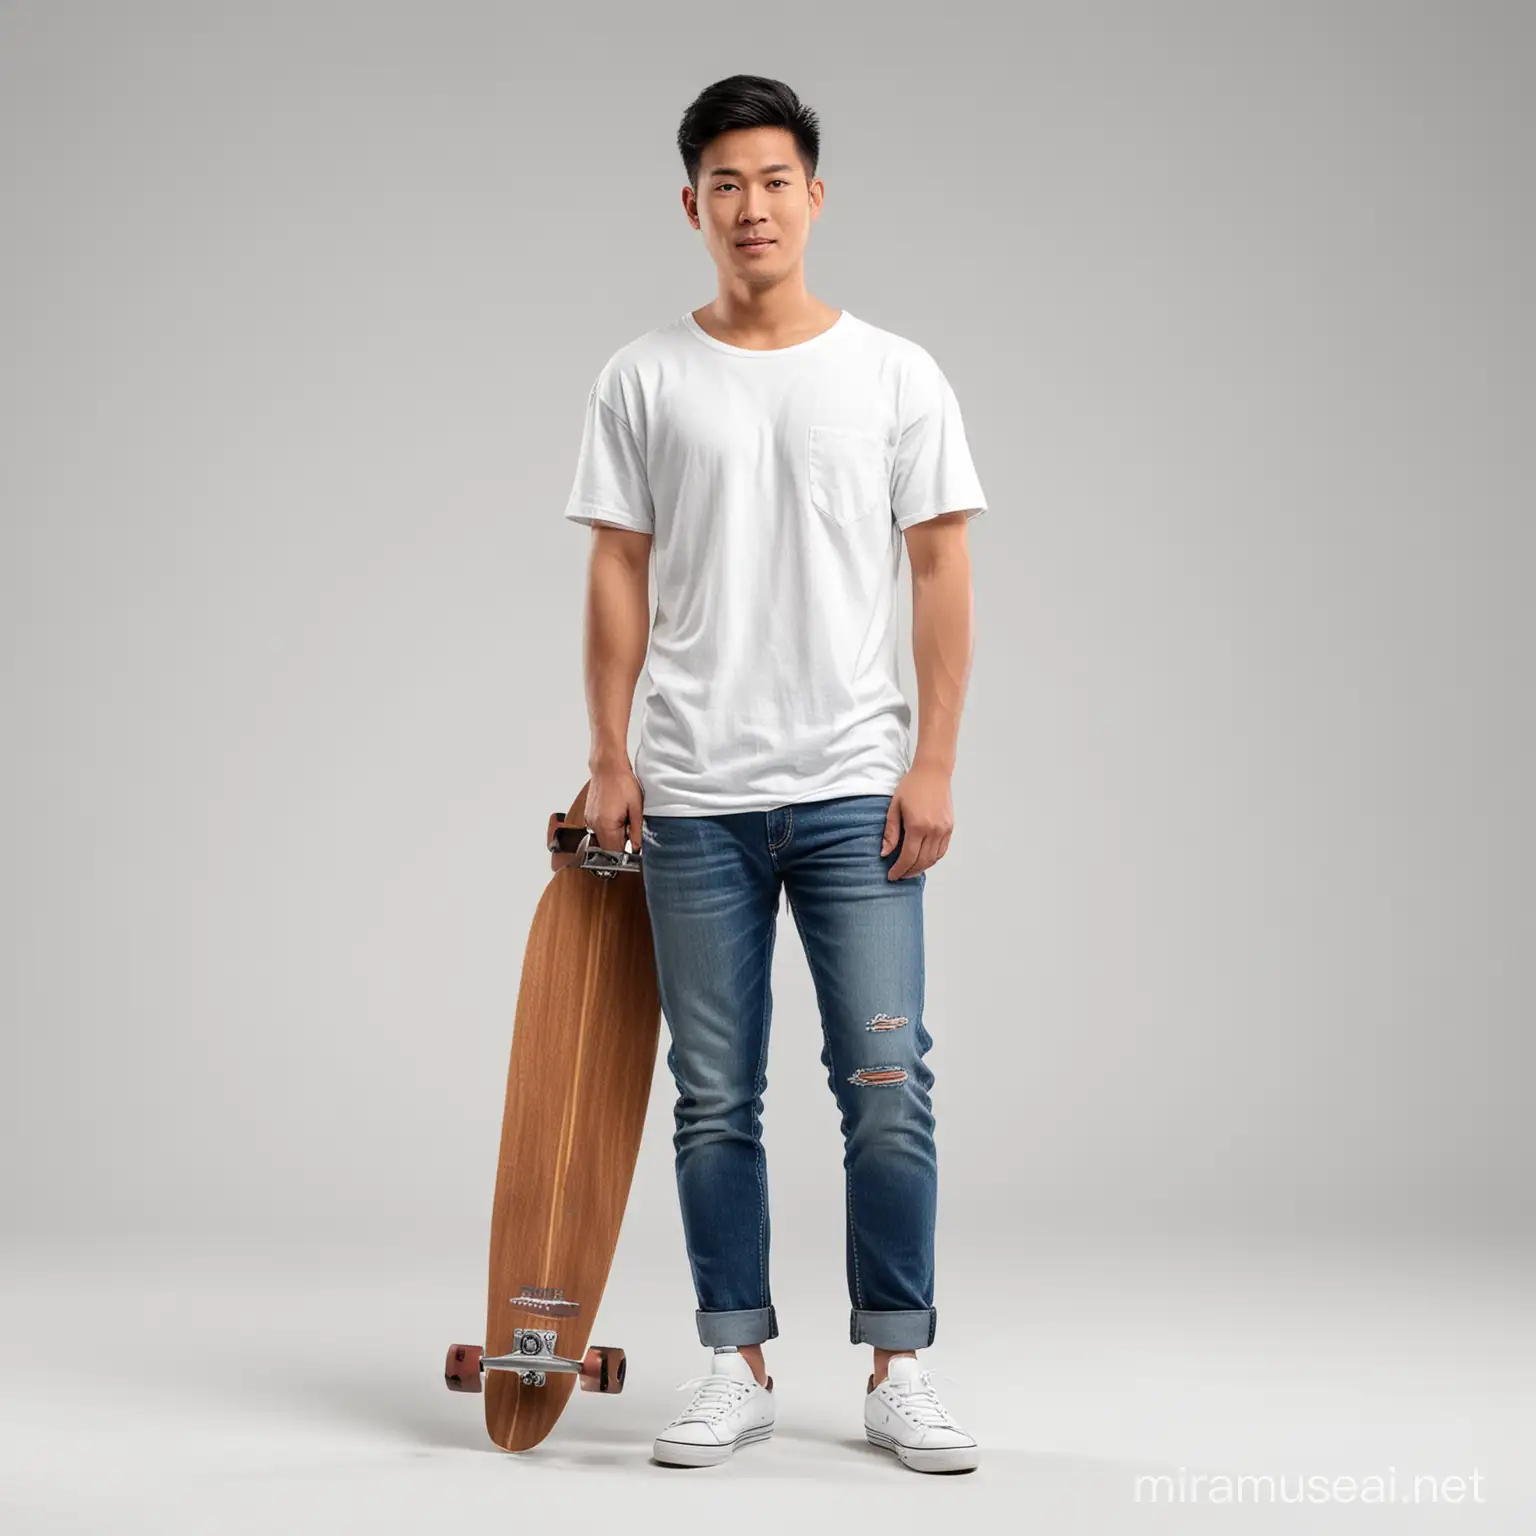 Standing photorealistic attractive asian man 25 years old in jeans and plain white t-shirt without pockets holding longboard in hand, full body front view including shoes perpendicular to lens in photo studio on white background.